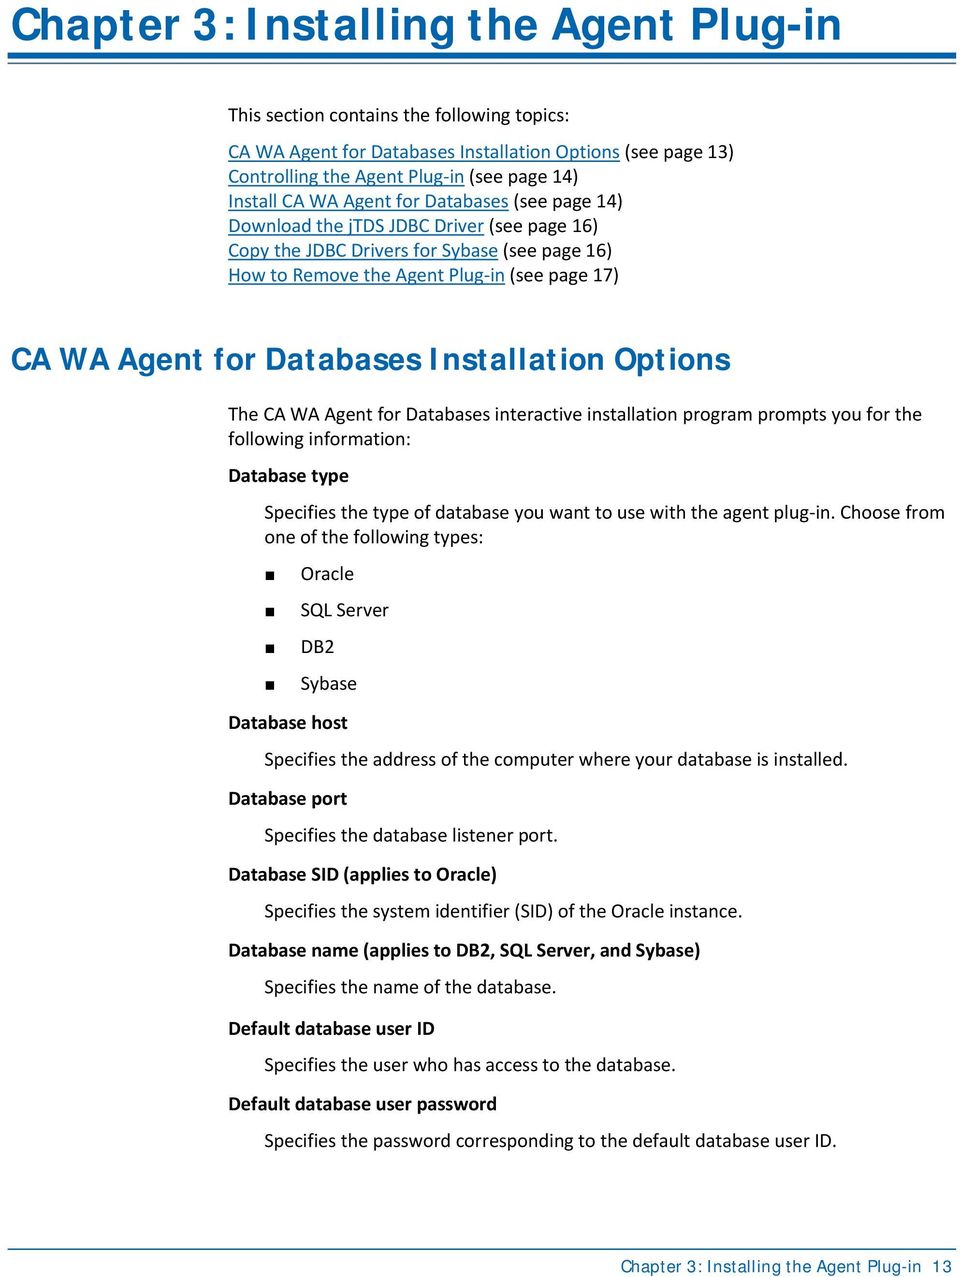 Installation Options The CA WA Agent for Databases interactive installation program prompts you for the following information: Database type Specifies the type of database you want to use with the